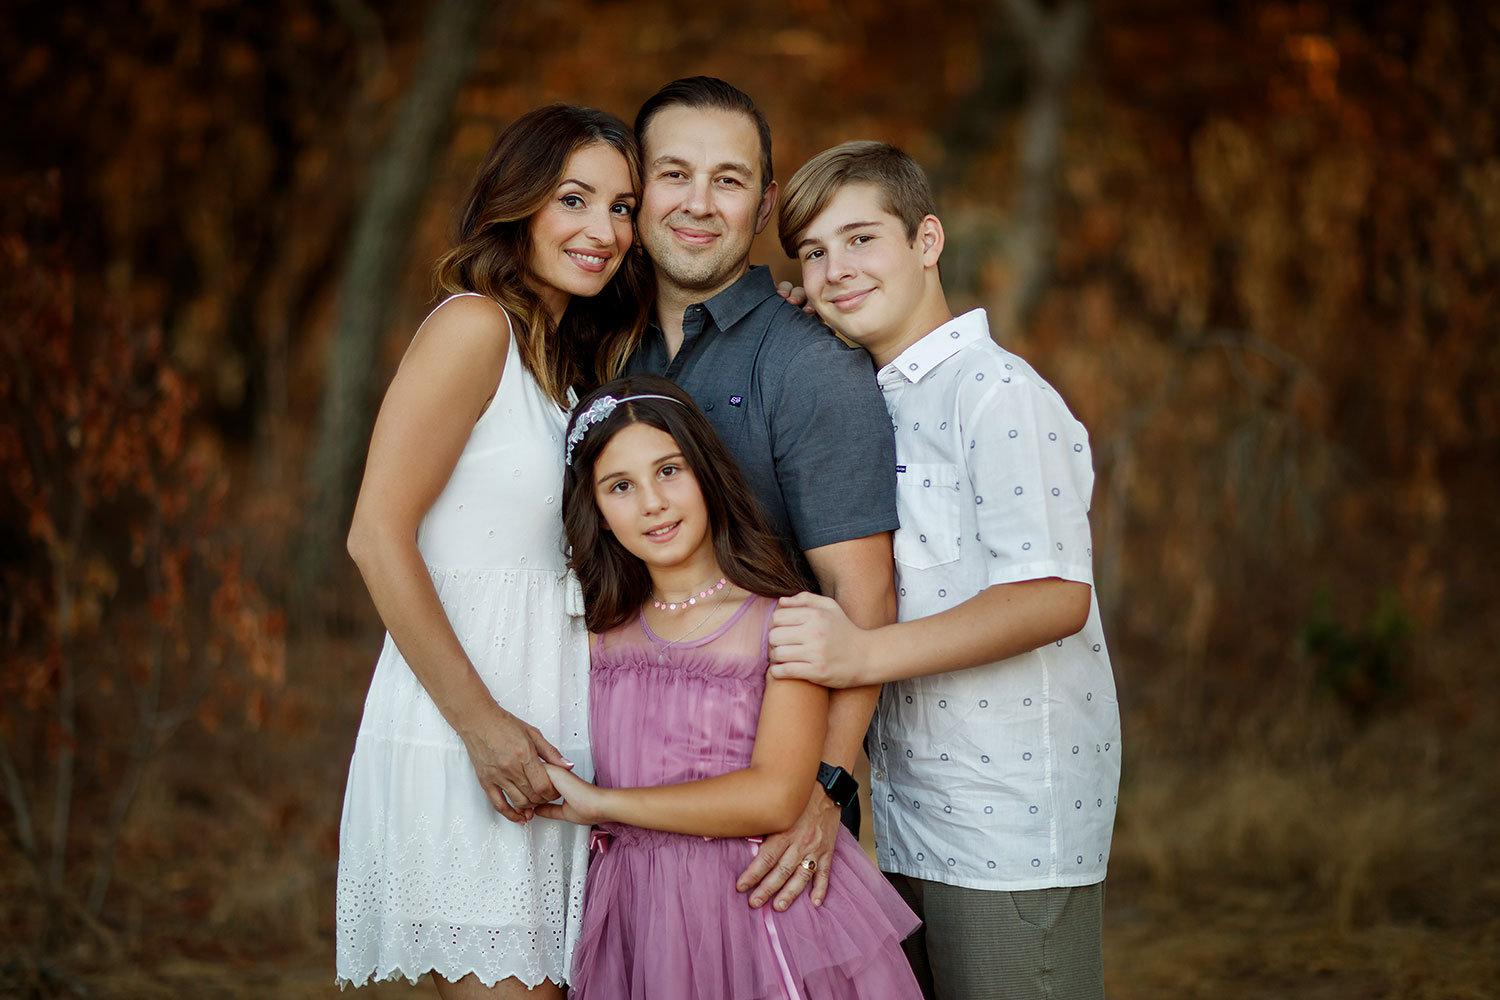 Family of 4 poses with baby | Photography poses family, Family picture poses,  Family photoshoot poses